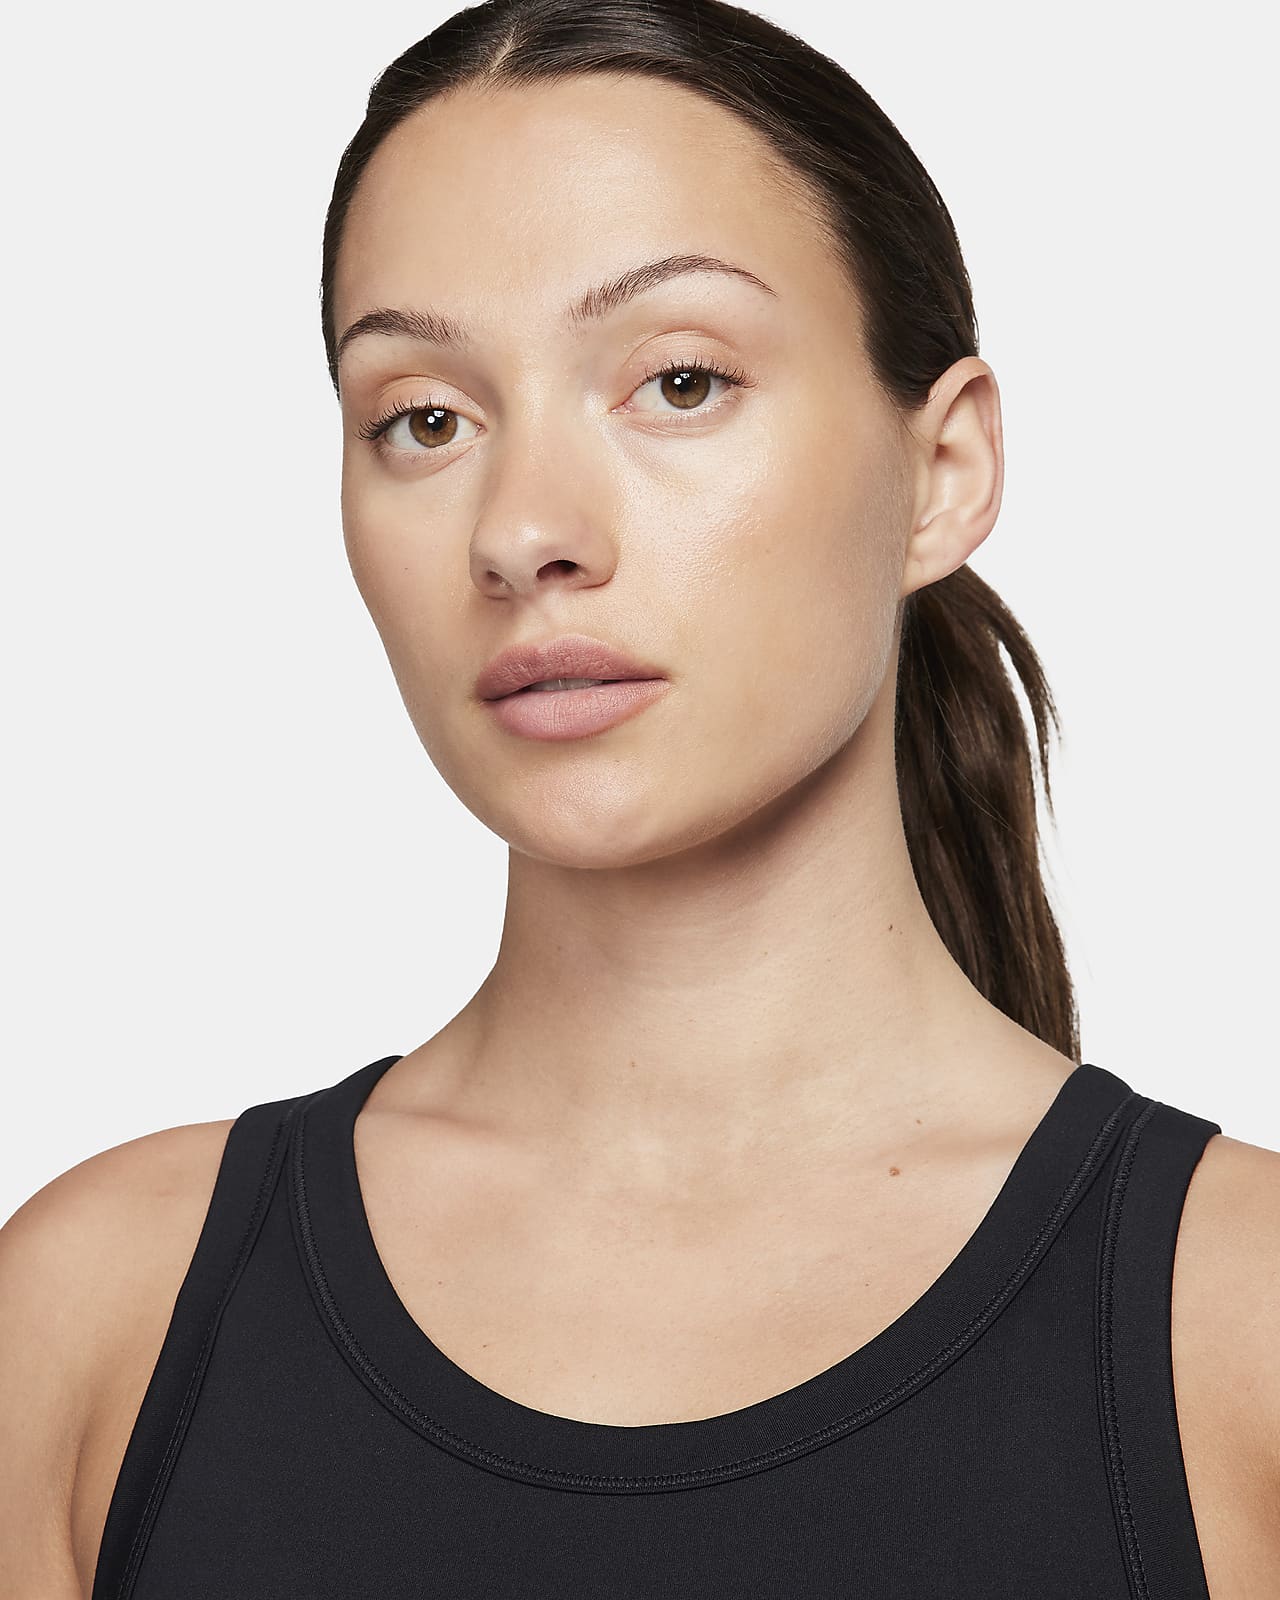 Nike One Fitted Women's Dri-FIT Strappy Cropped Tank Top.